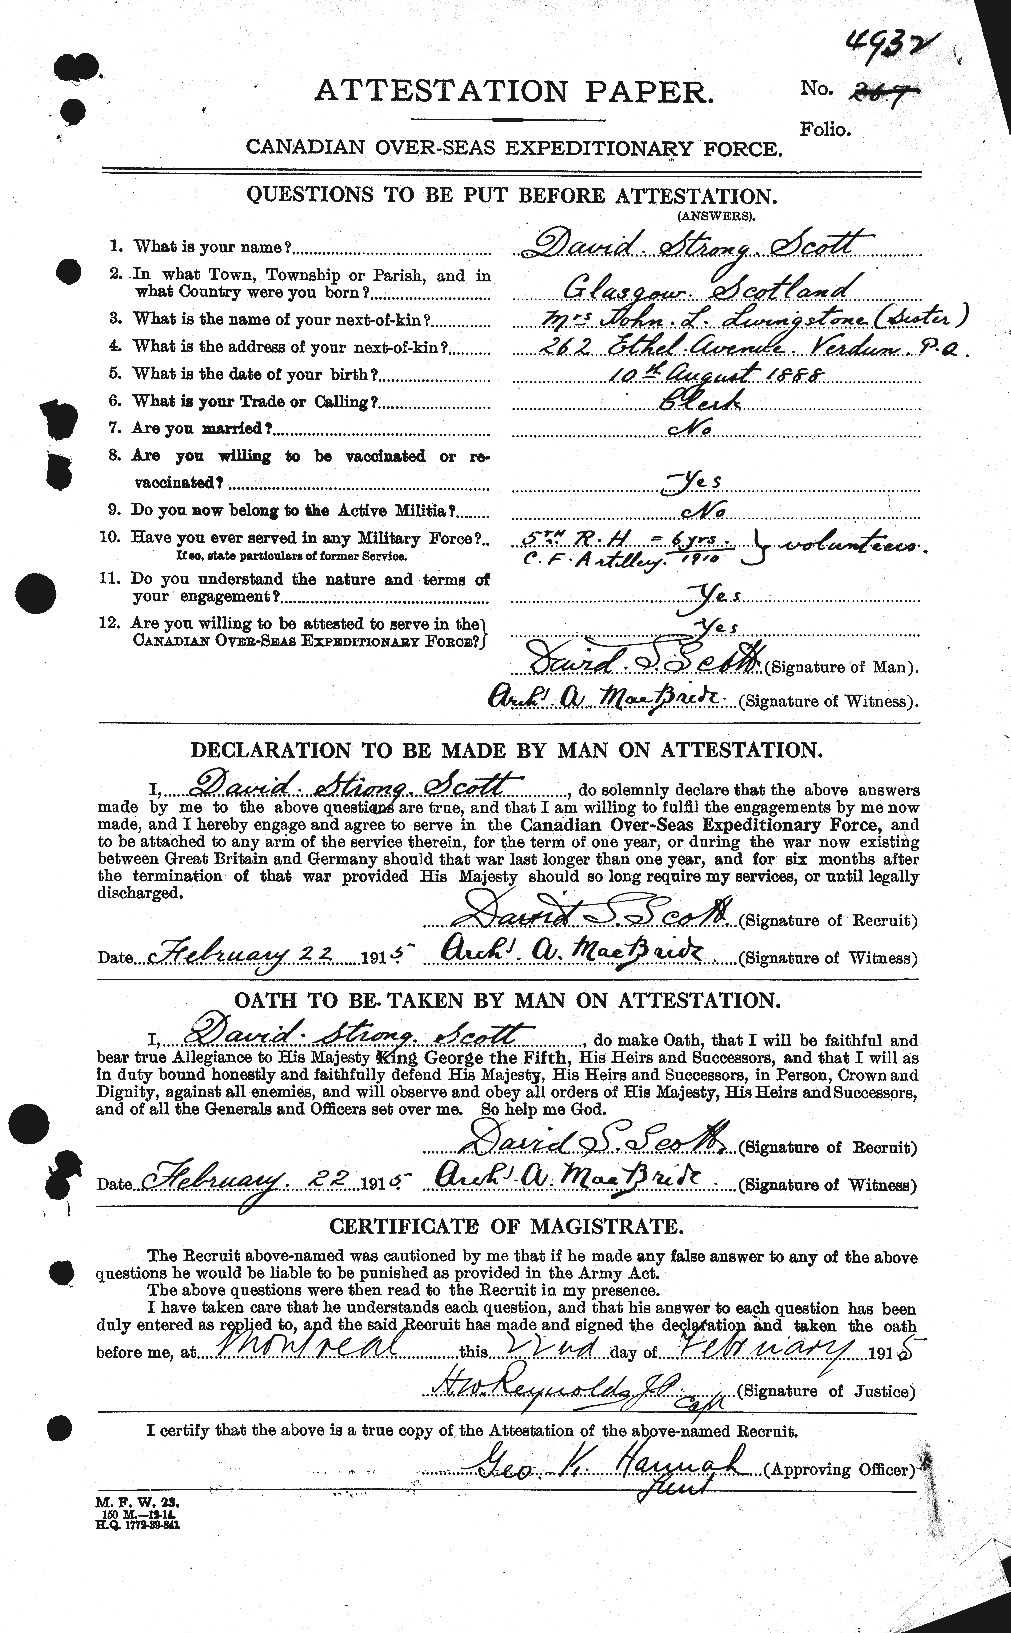 Personnel Records of the First World War - CEF 085369a